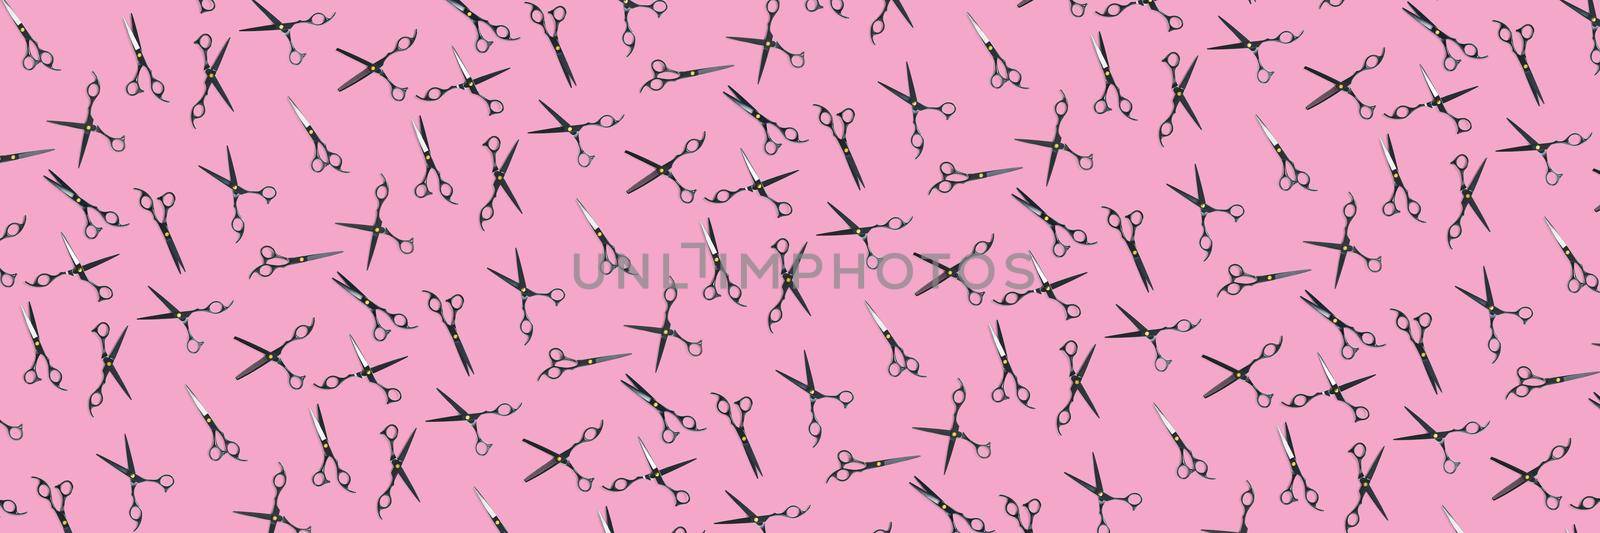 Background made from black scissors. professional hairdresser black scissors isolated on pink. Black barber scissors, close up. pop art background by PhotoTime